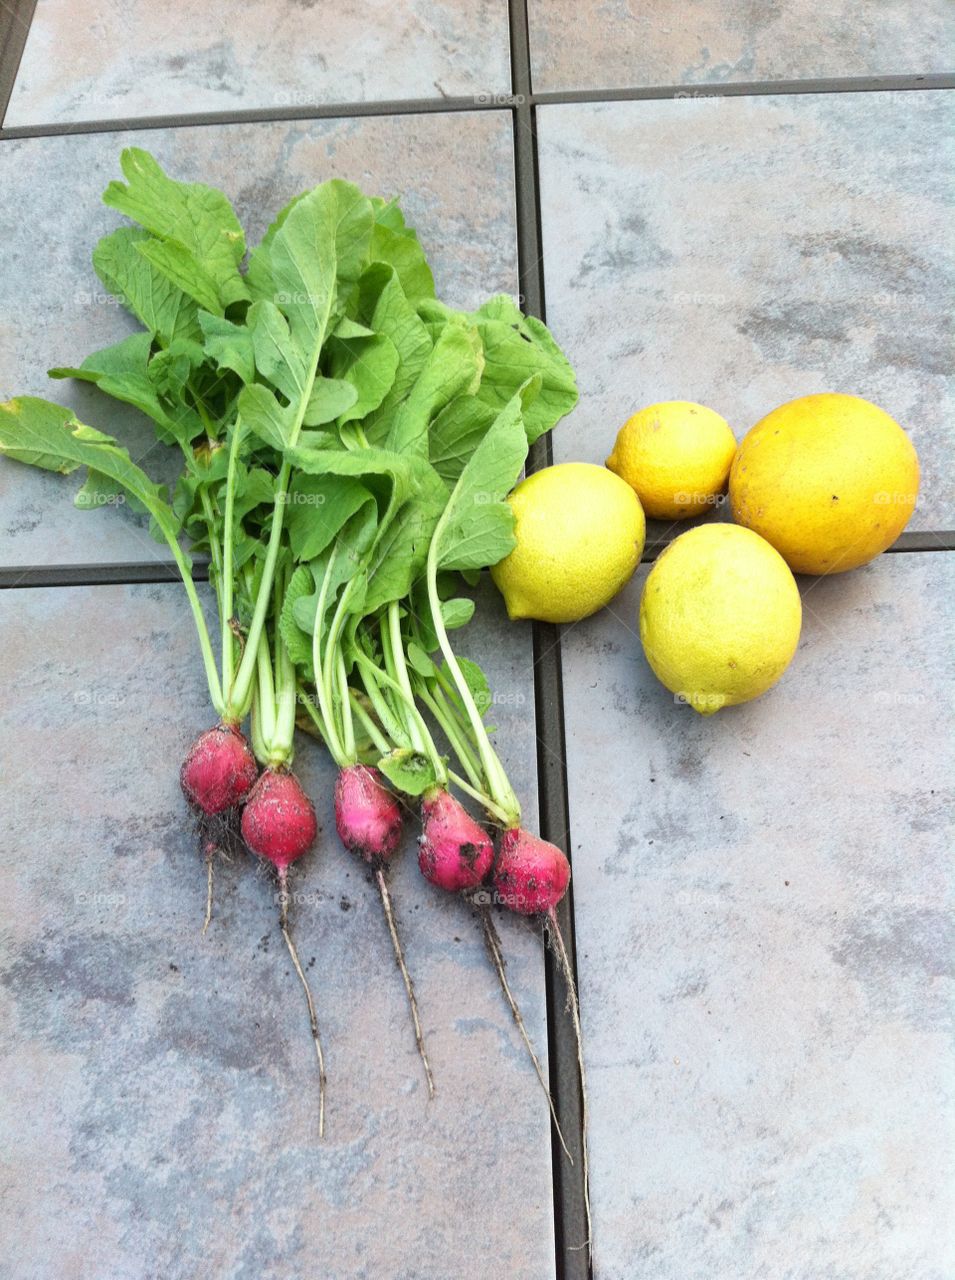 Fresh picked radishes and lemons from the garden for supper. 